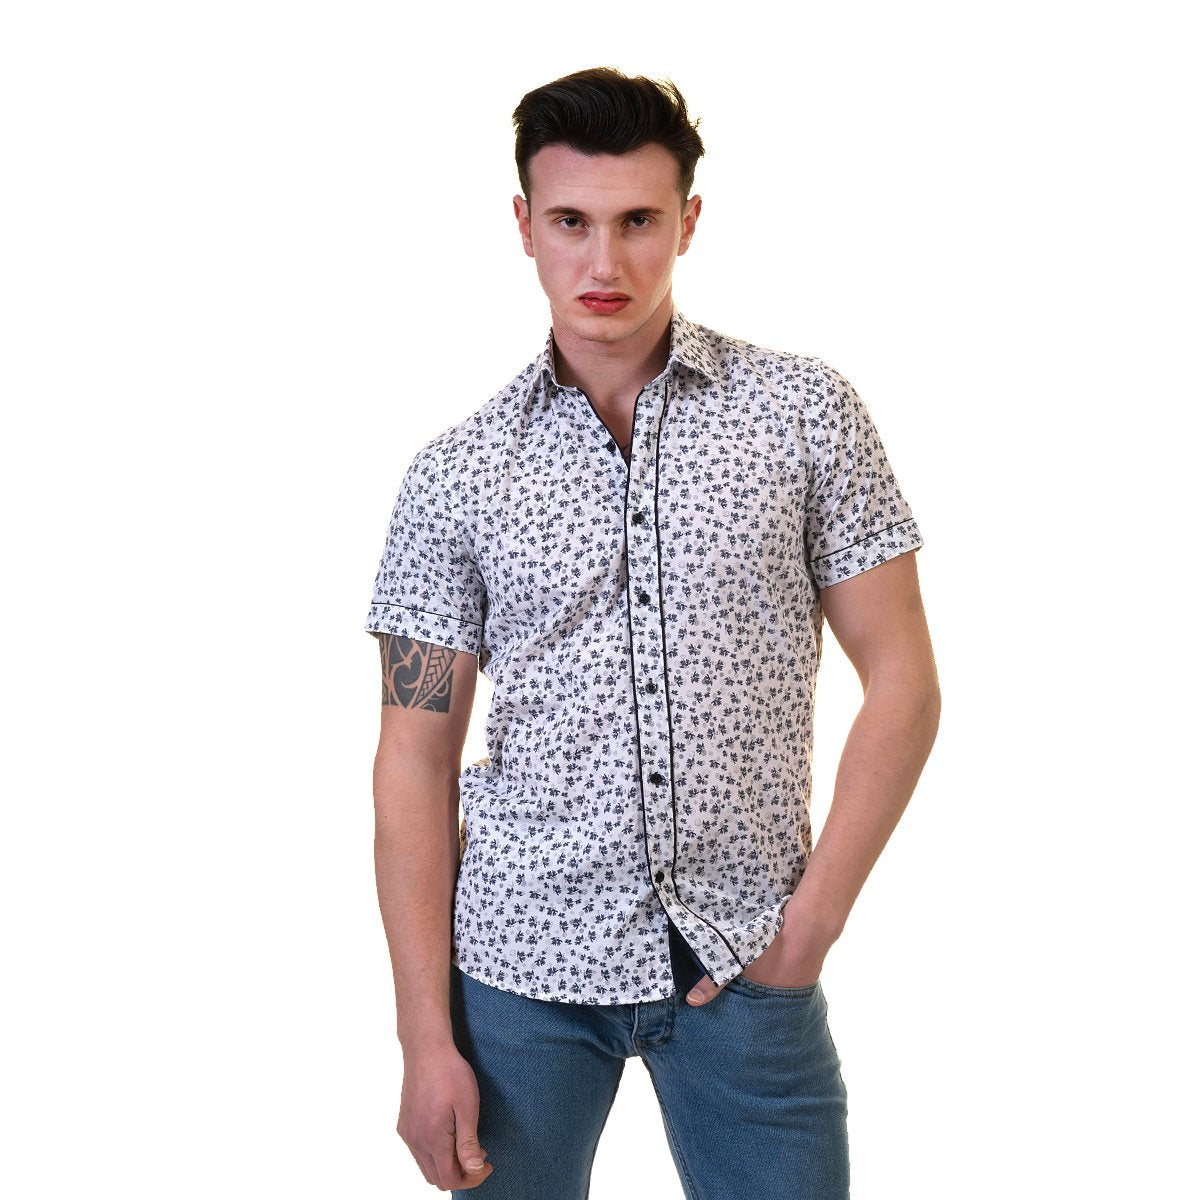 Picture of a Premium Men's Short Sleeve Button Up Shirt in White Print front view